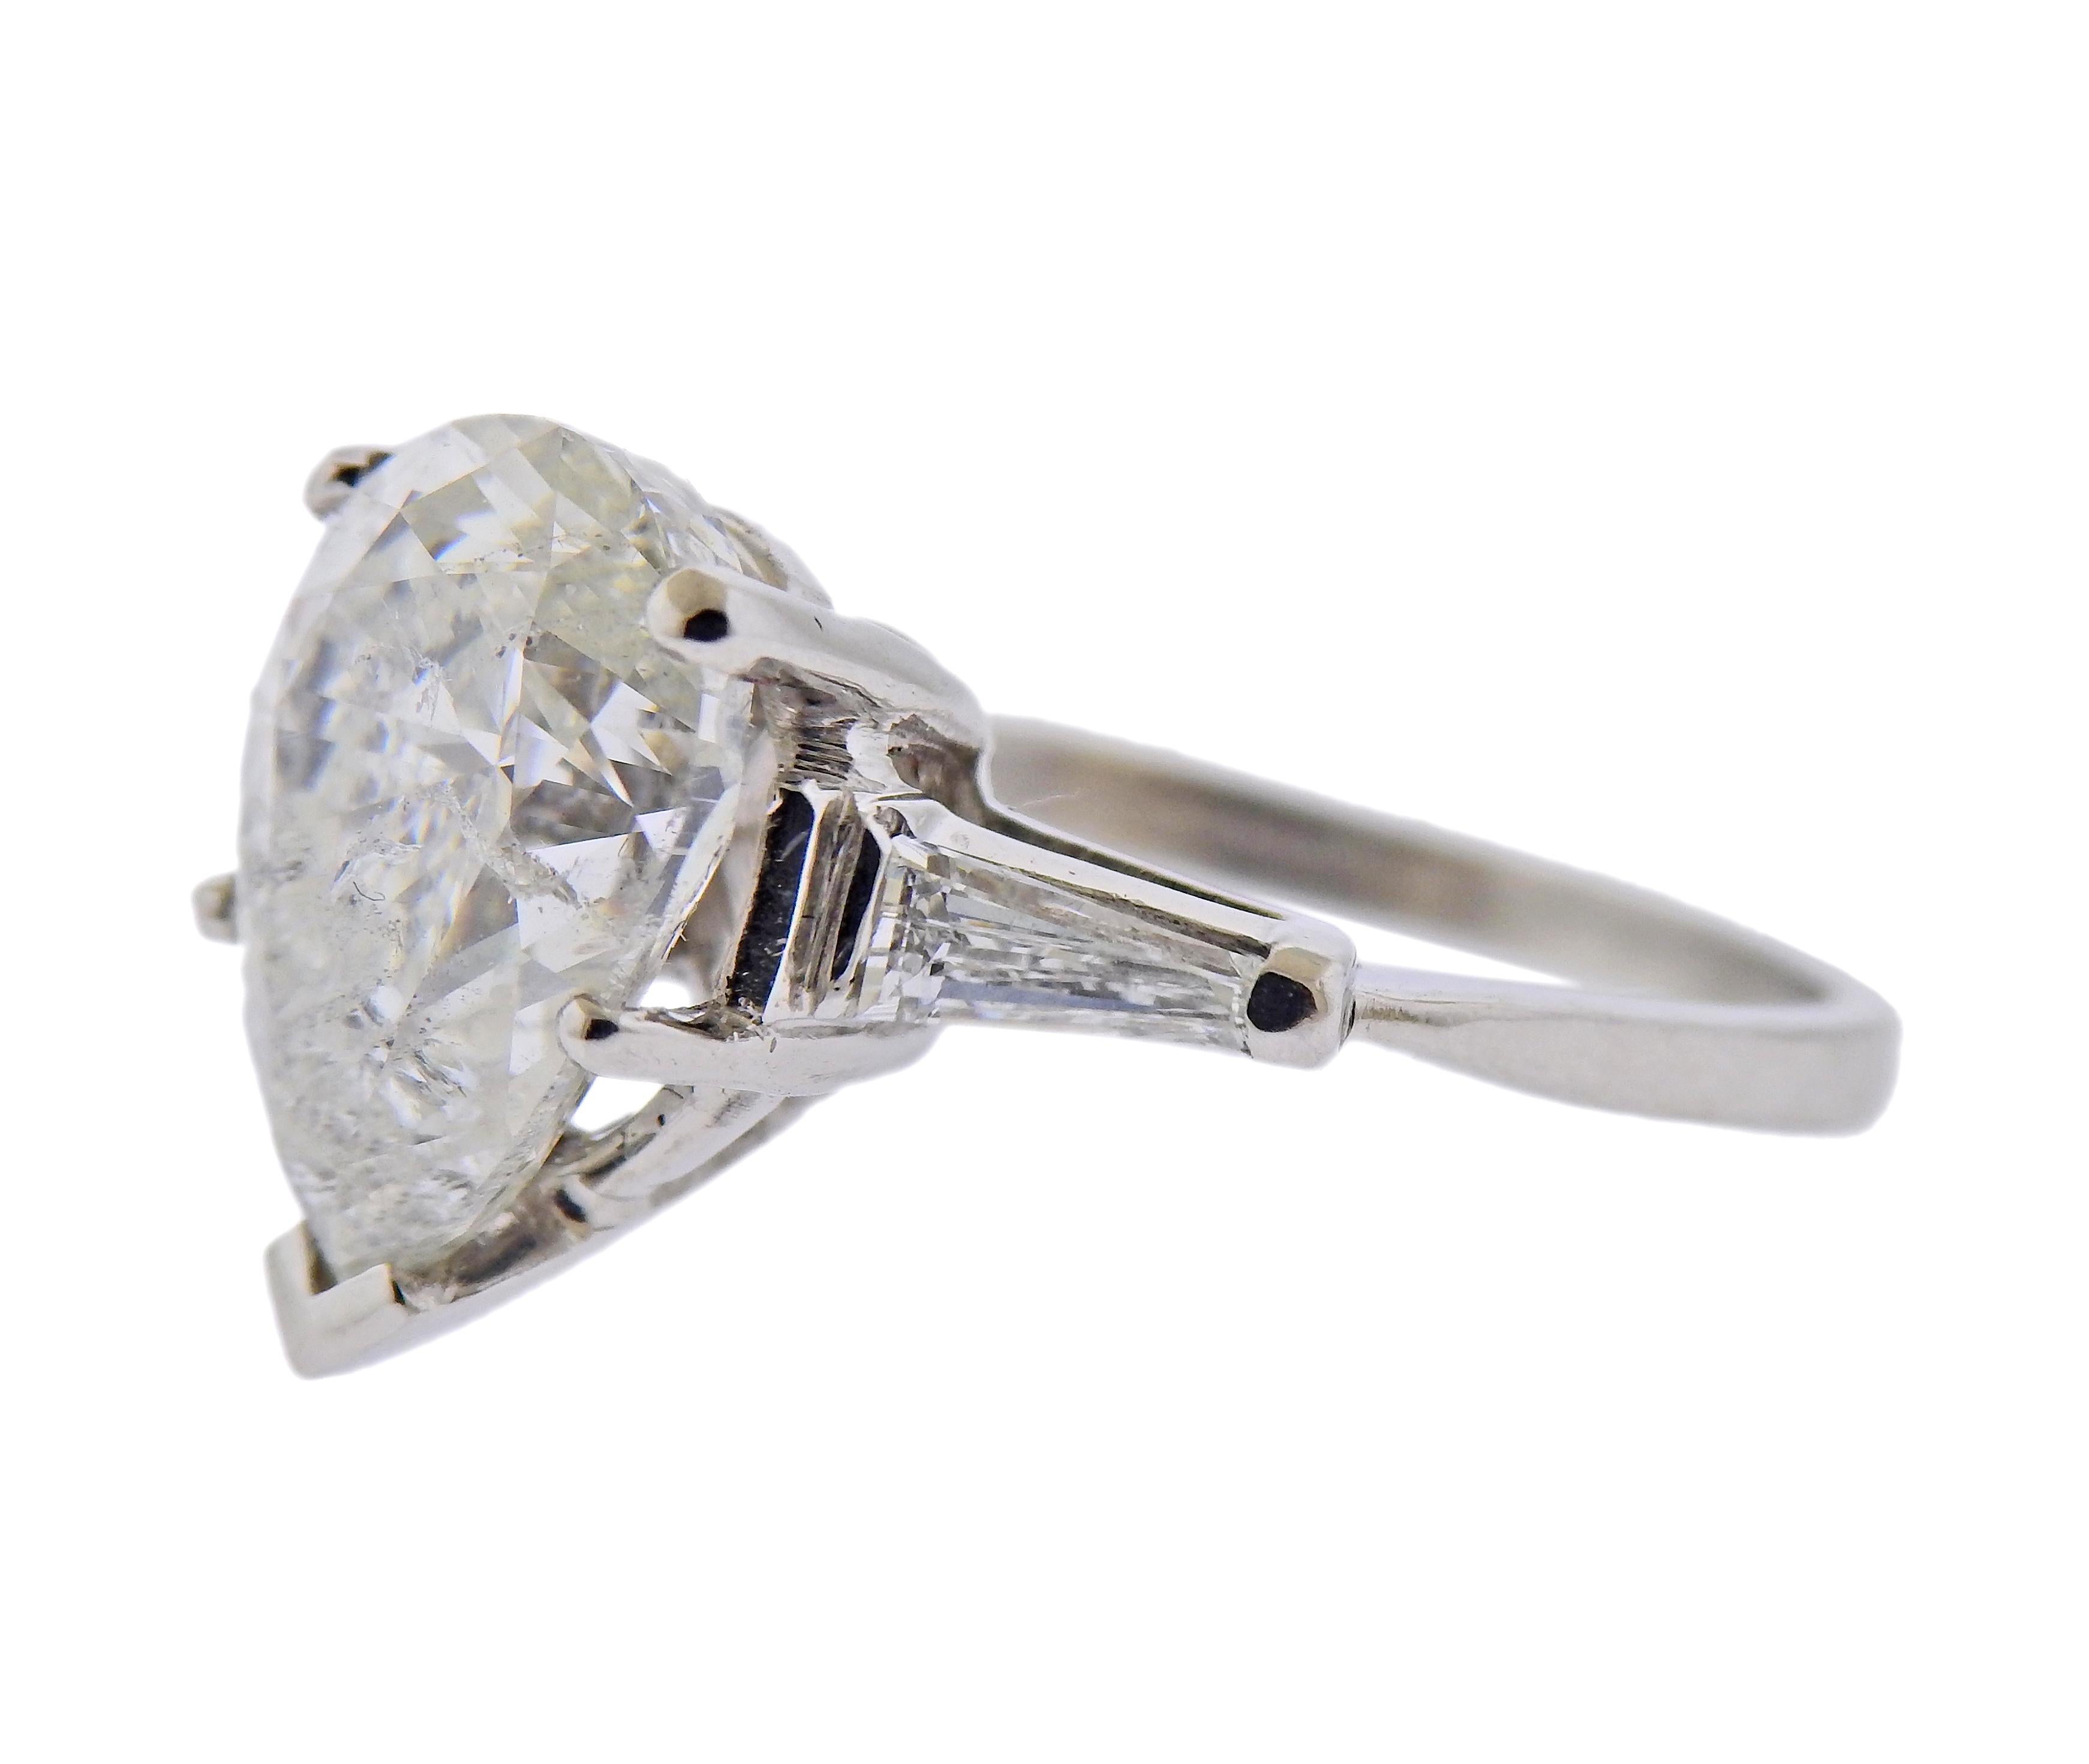 EGL certified 5.02ct pear shaped diamond G/SI2, set in platinum ring, with two side tapered baguetttes. Ring size 6. Center stone measures approx. 11.55 x 8.8 x 6.8mm.  Weight - 5.1 grams. 